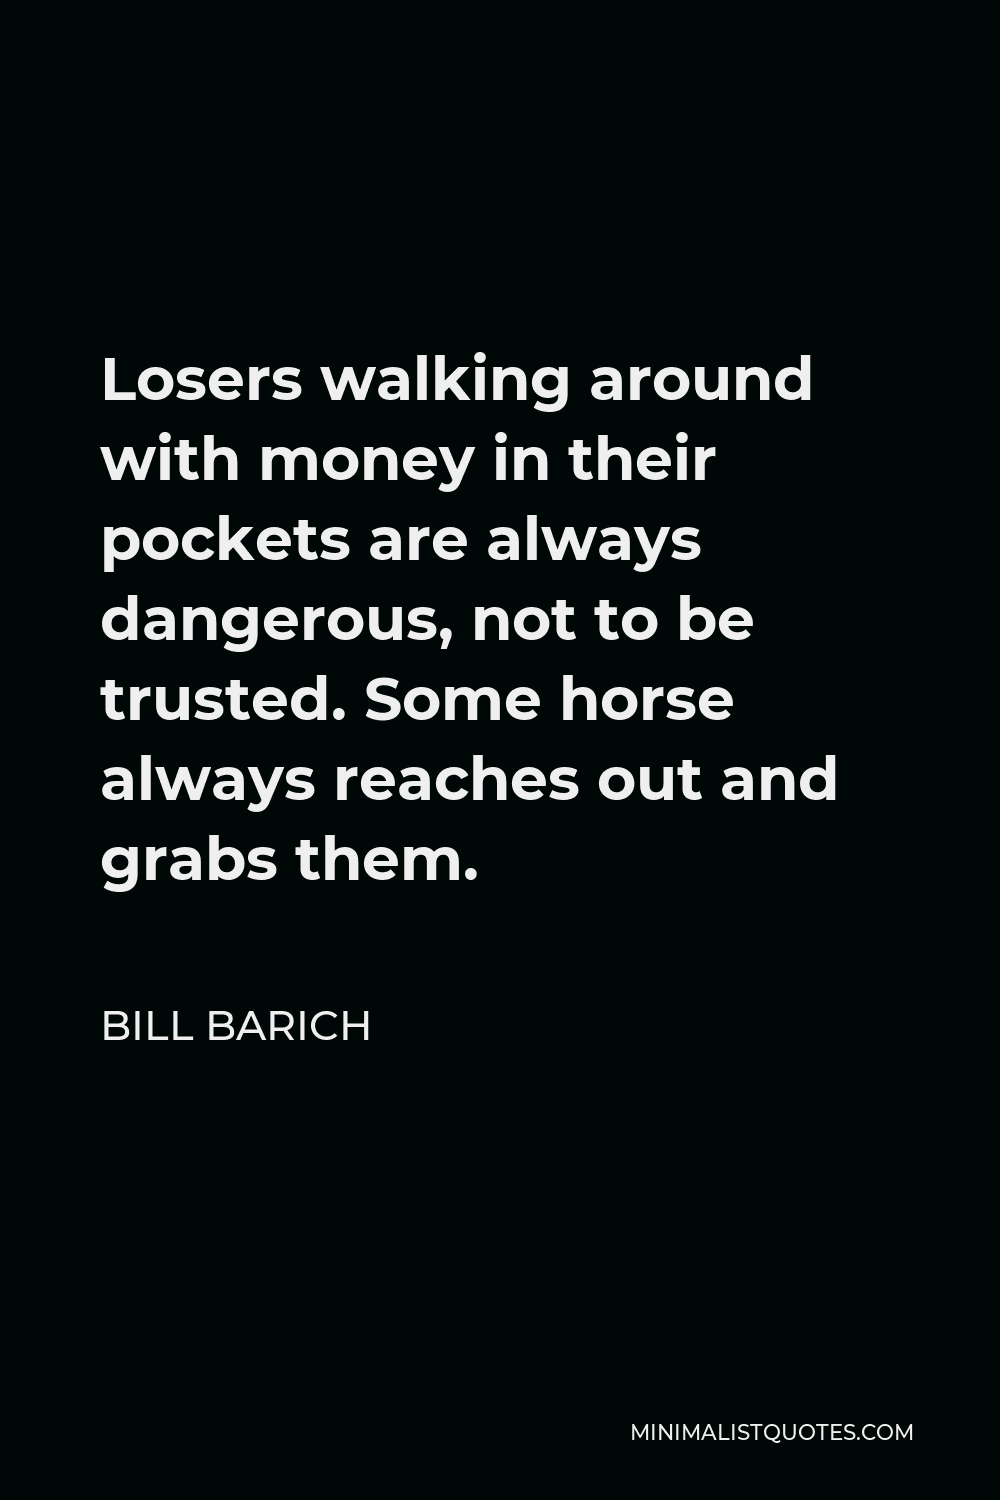 Bill Barich Quote - Losers walking around with money in their pockets are always dangerous, not to be trusted. Some horse always reaches out and grabs them.